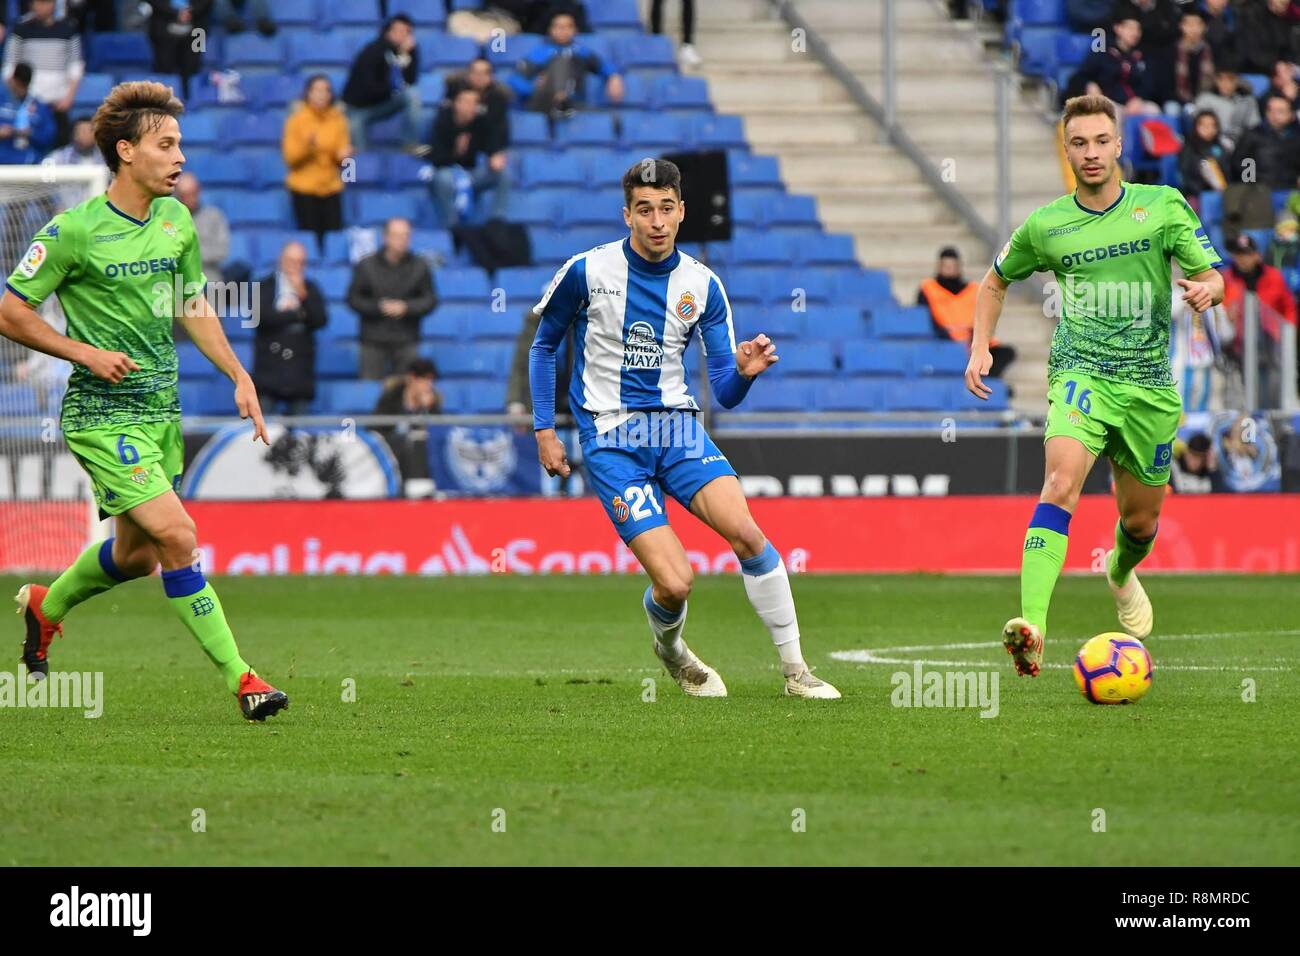 Marc roca of RCD Espanyol in action during the spanish league, La Liga,  football match between